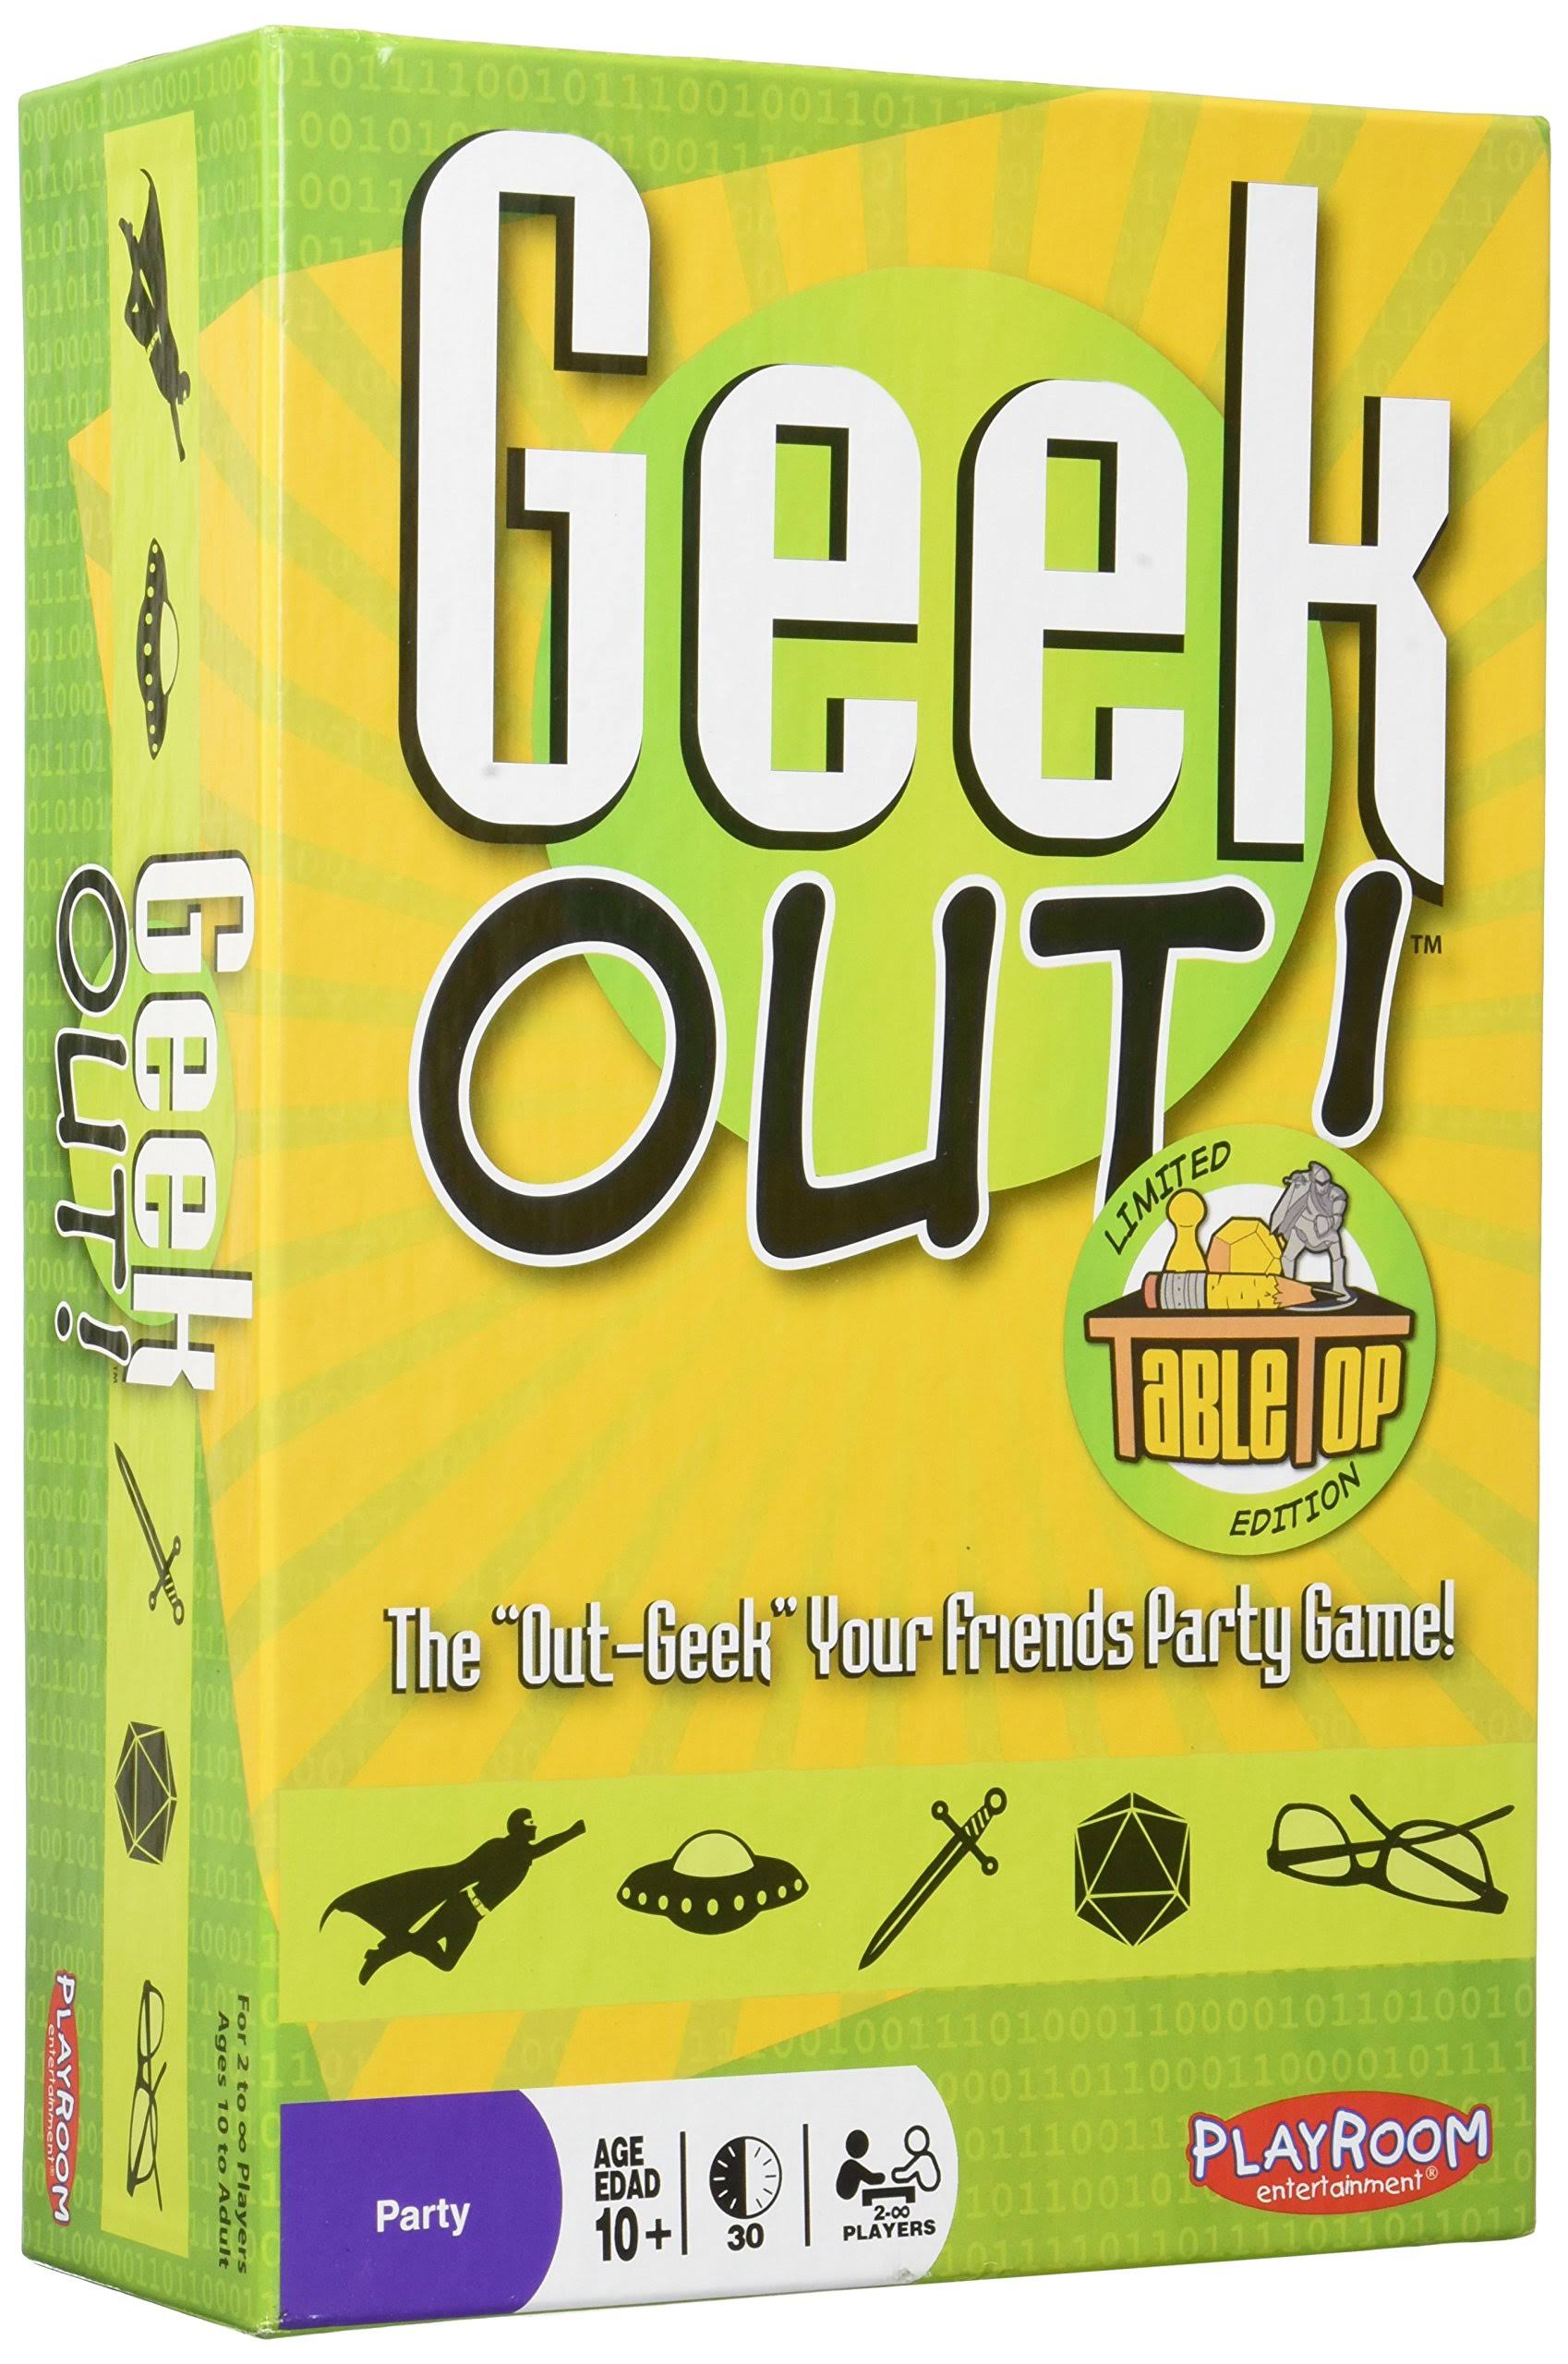 Playroom Entertainment Geek Out Tabletop Limited Edition Board Game